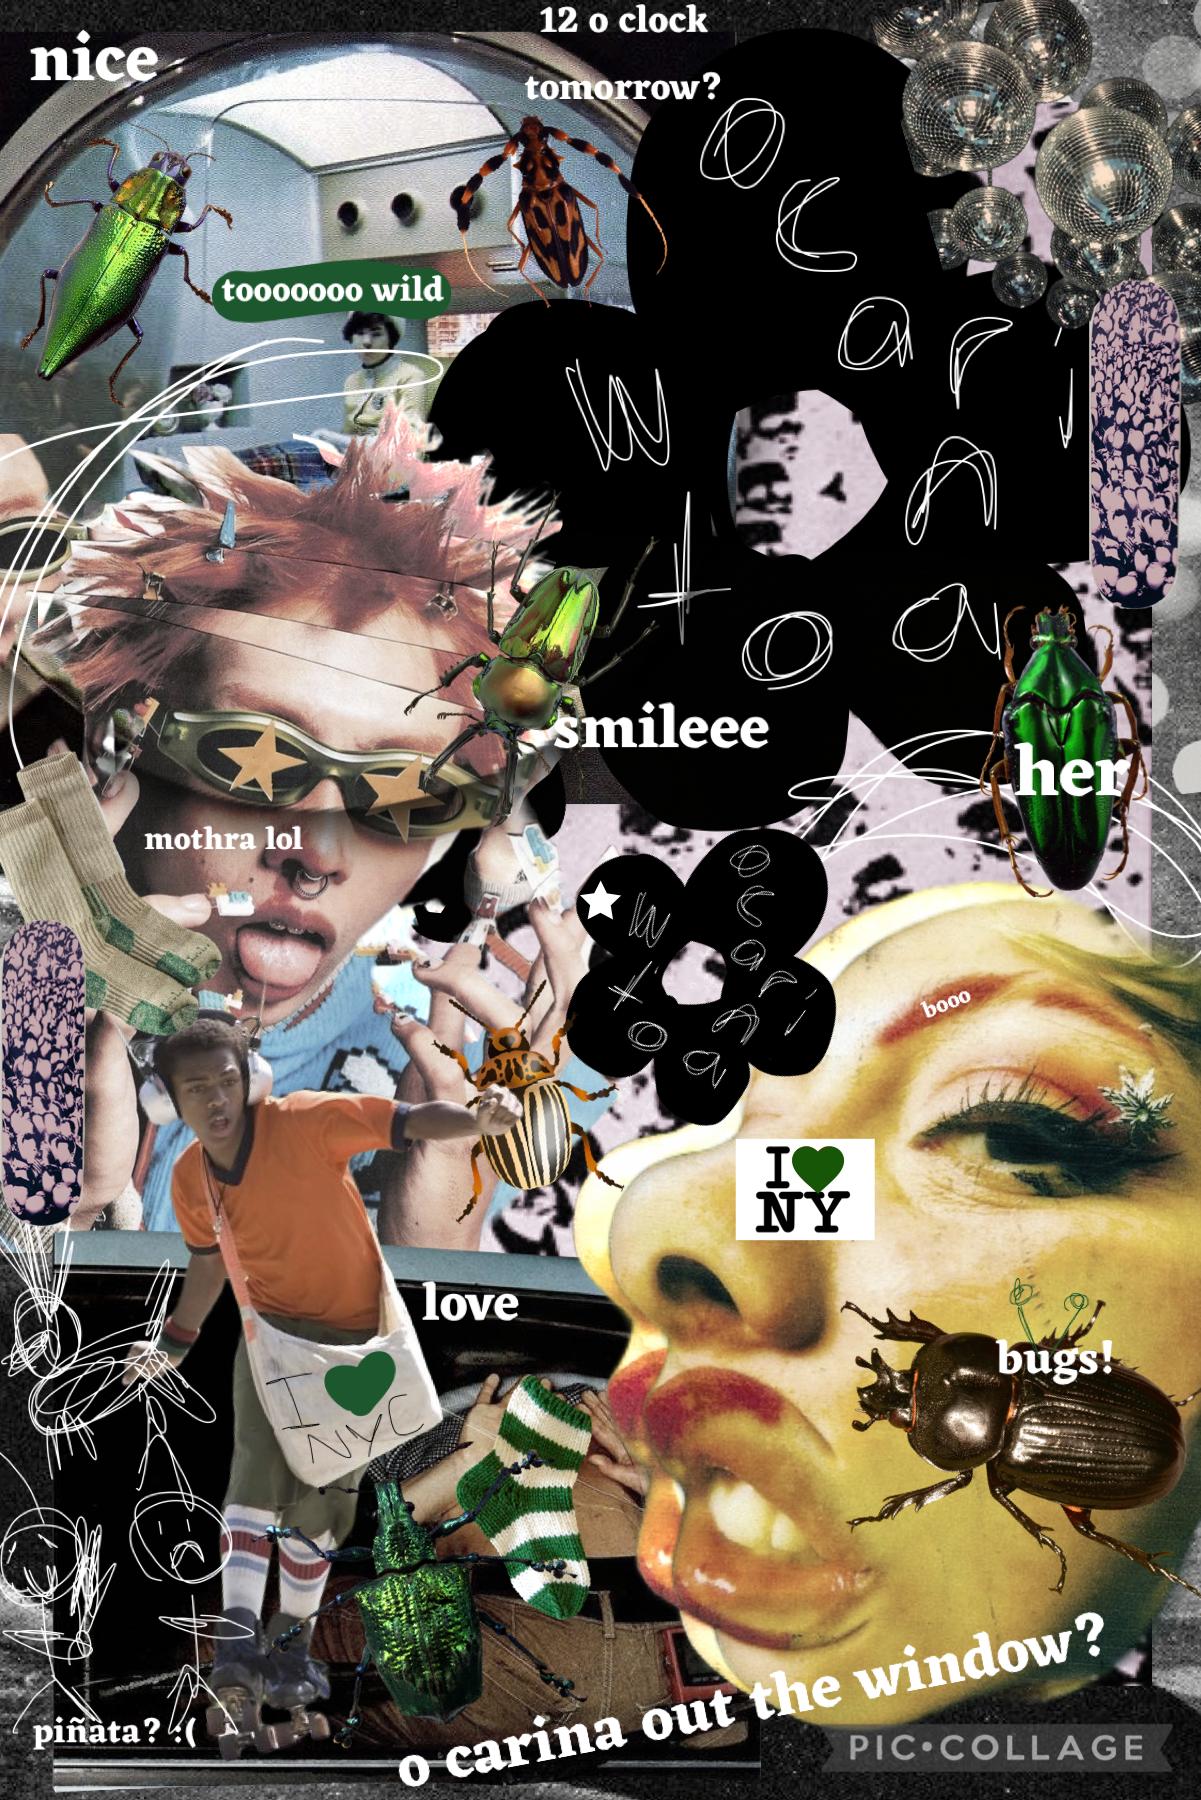 i was tired when i made this and i sorta just smooshed pinterest images onto eachother. enjoy